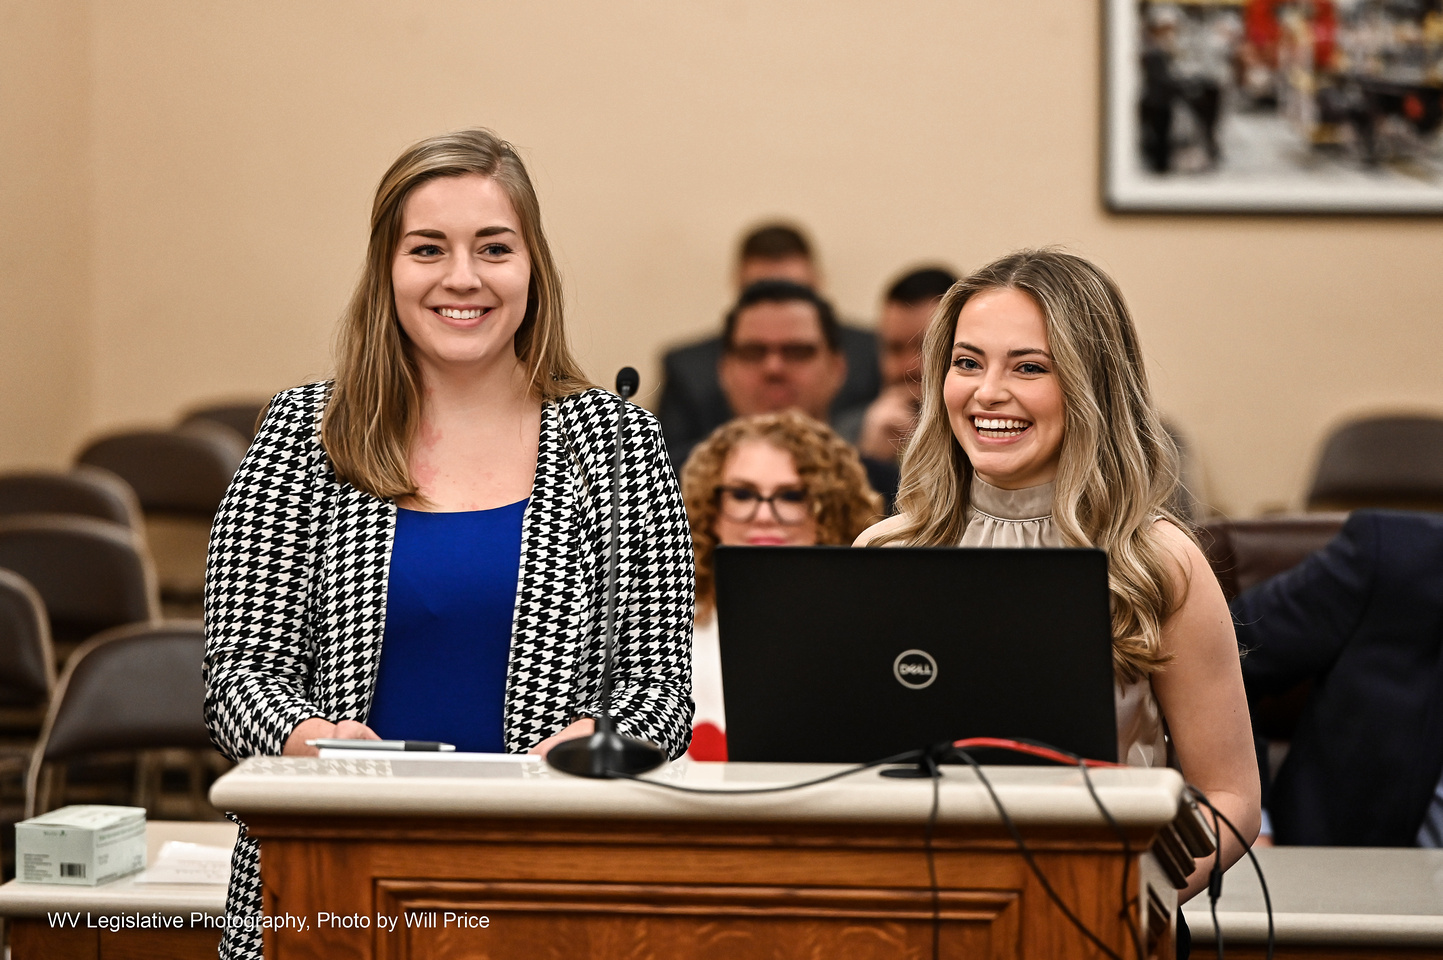 Two young women, blonde and smiling, stand side-by-side at a podium wearing formal attire in a West Virginia Senate committee room.